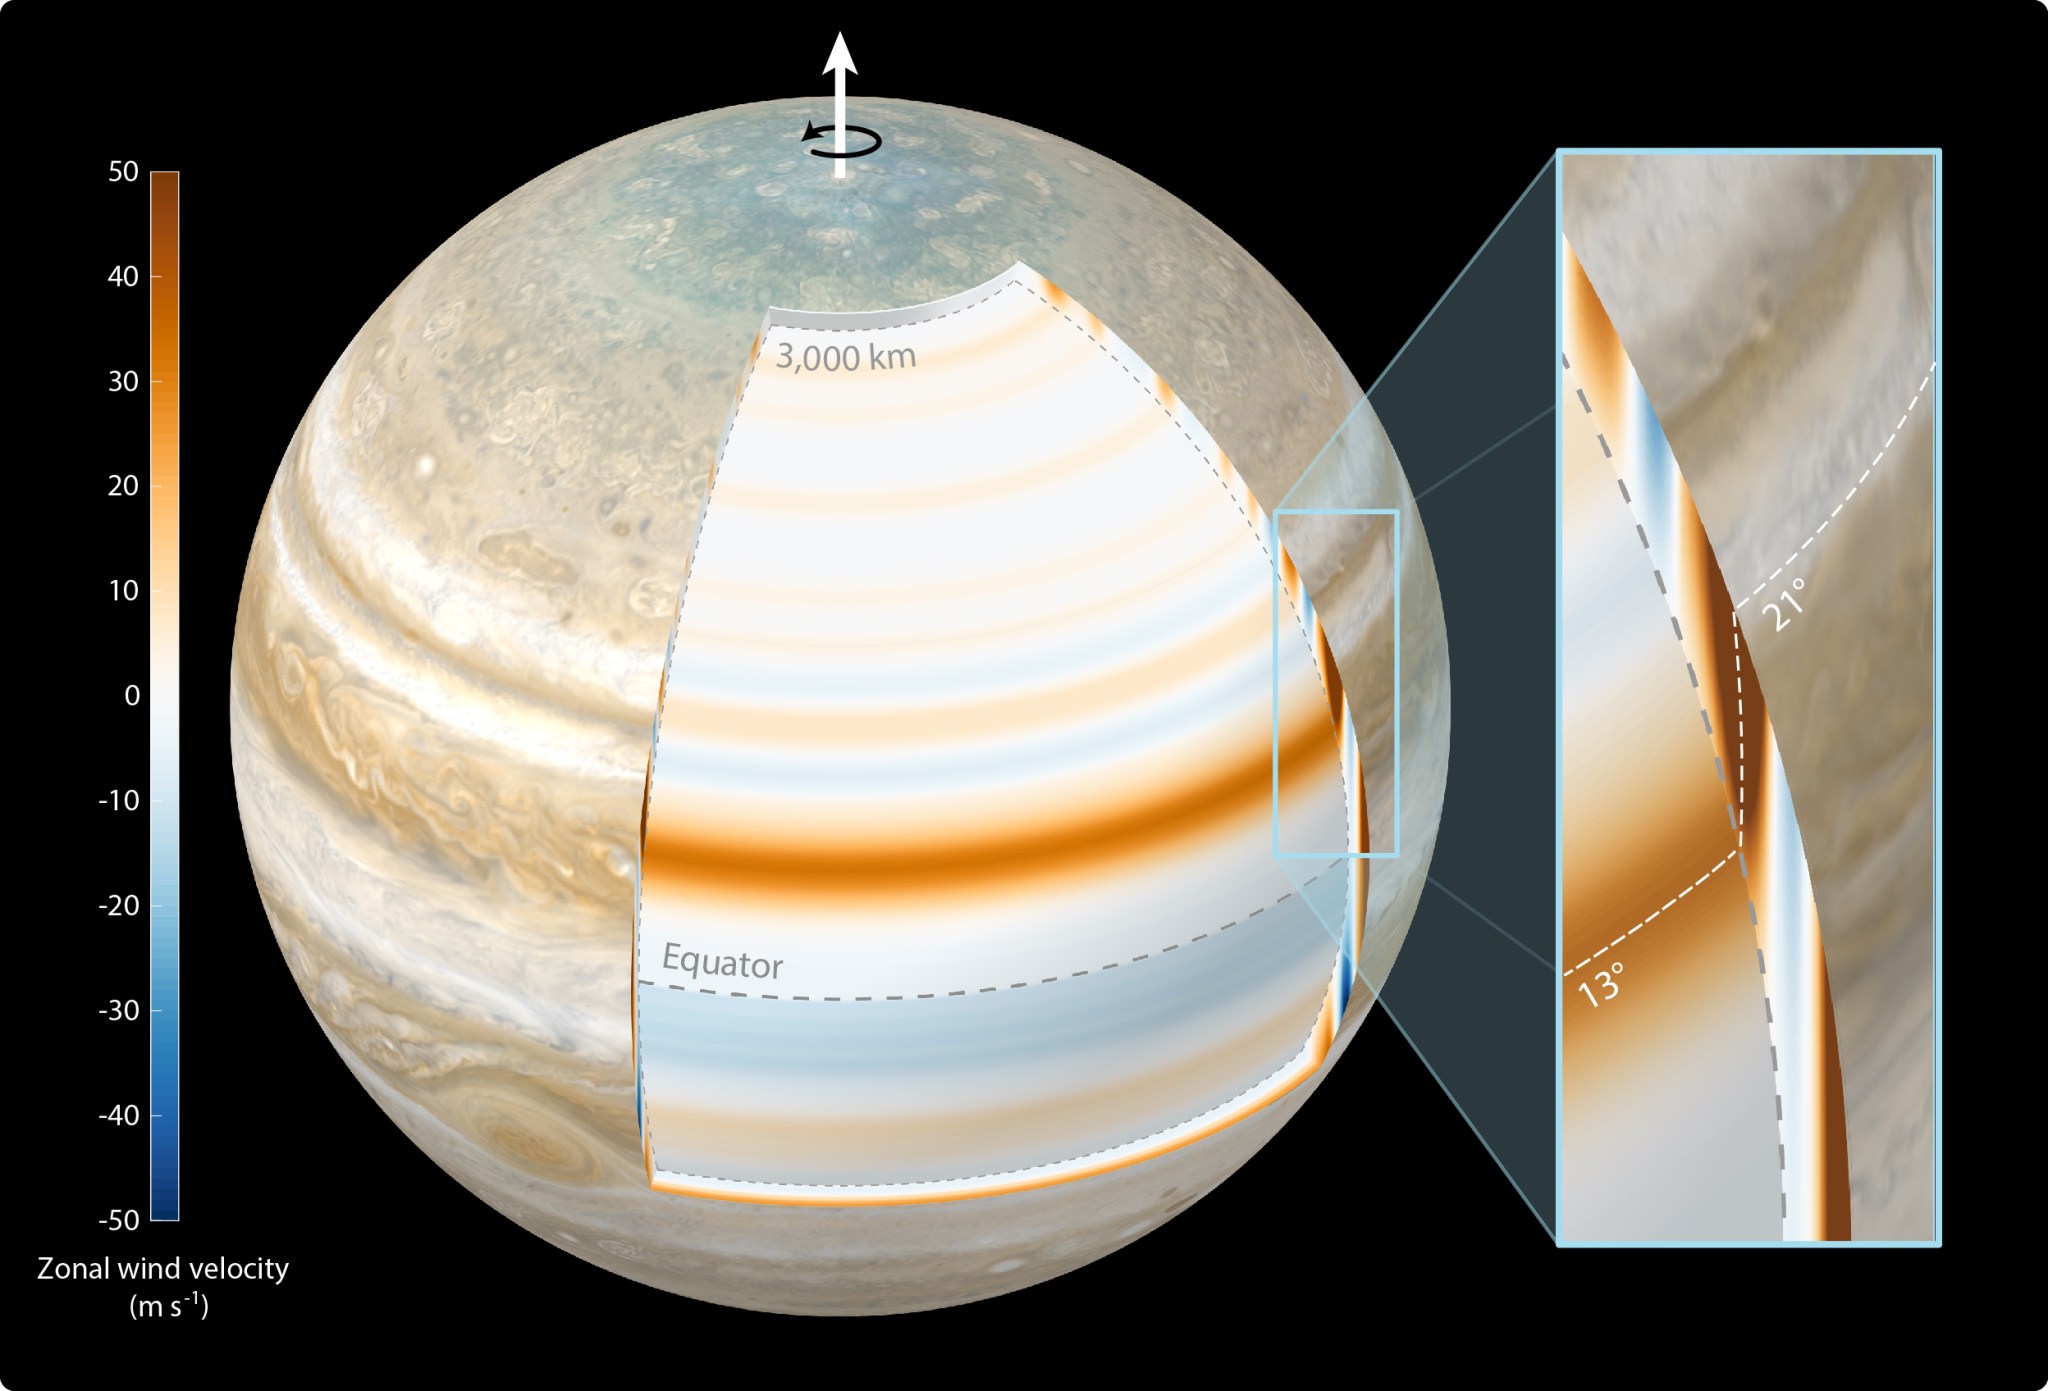 This illustration depicts findings that Jupiter’s atmospheric winds